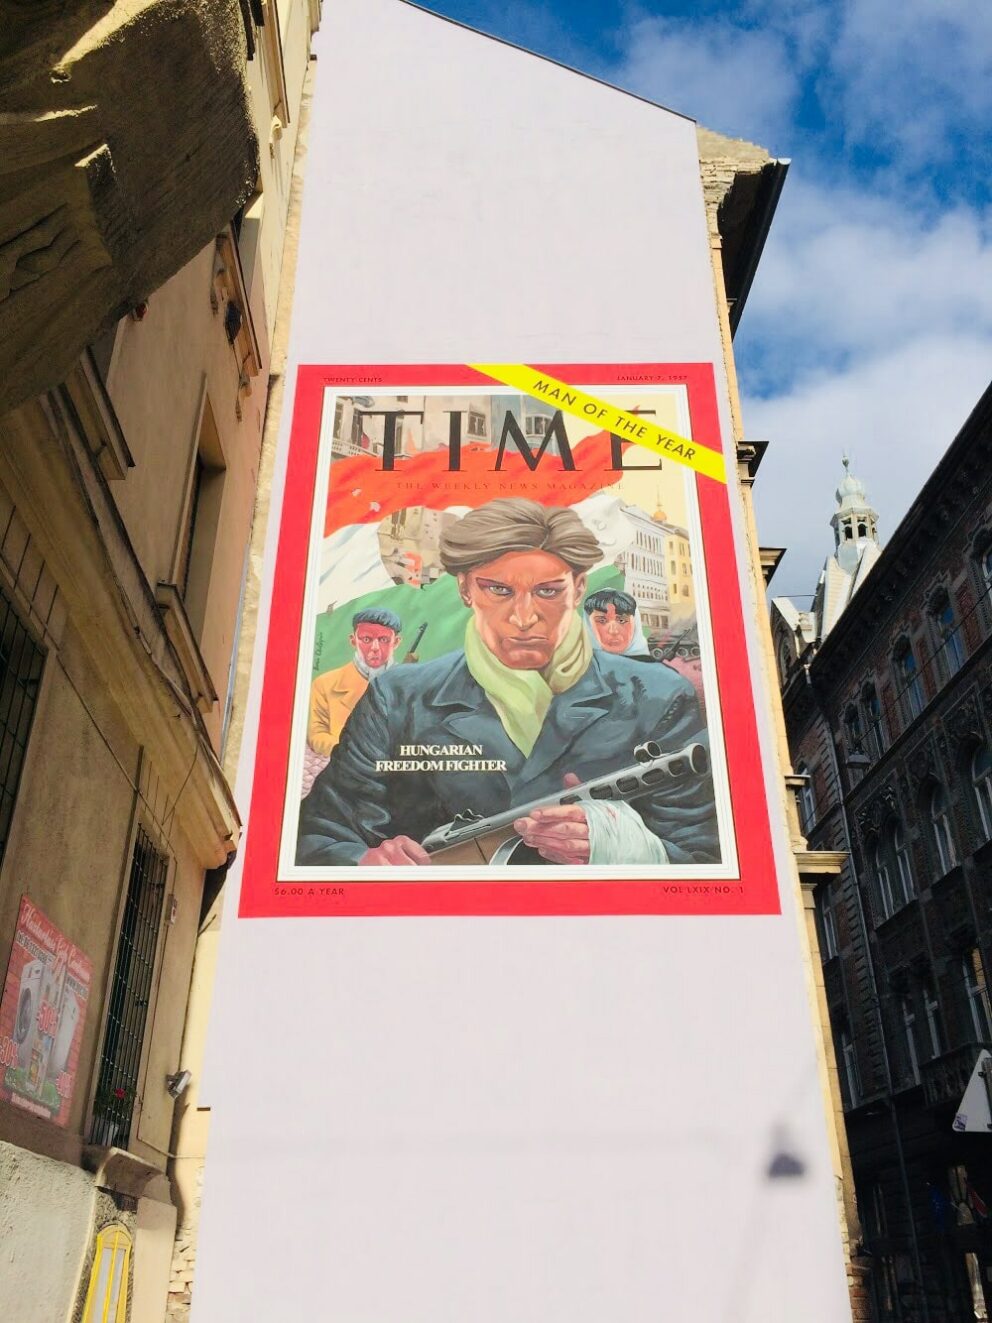 Time Magazine’s Man of the Year mural, a famous piece of street art in Budapest